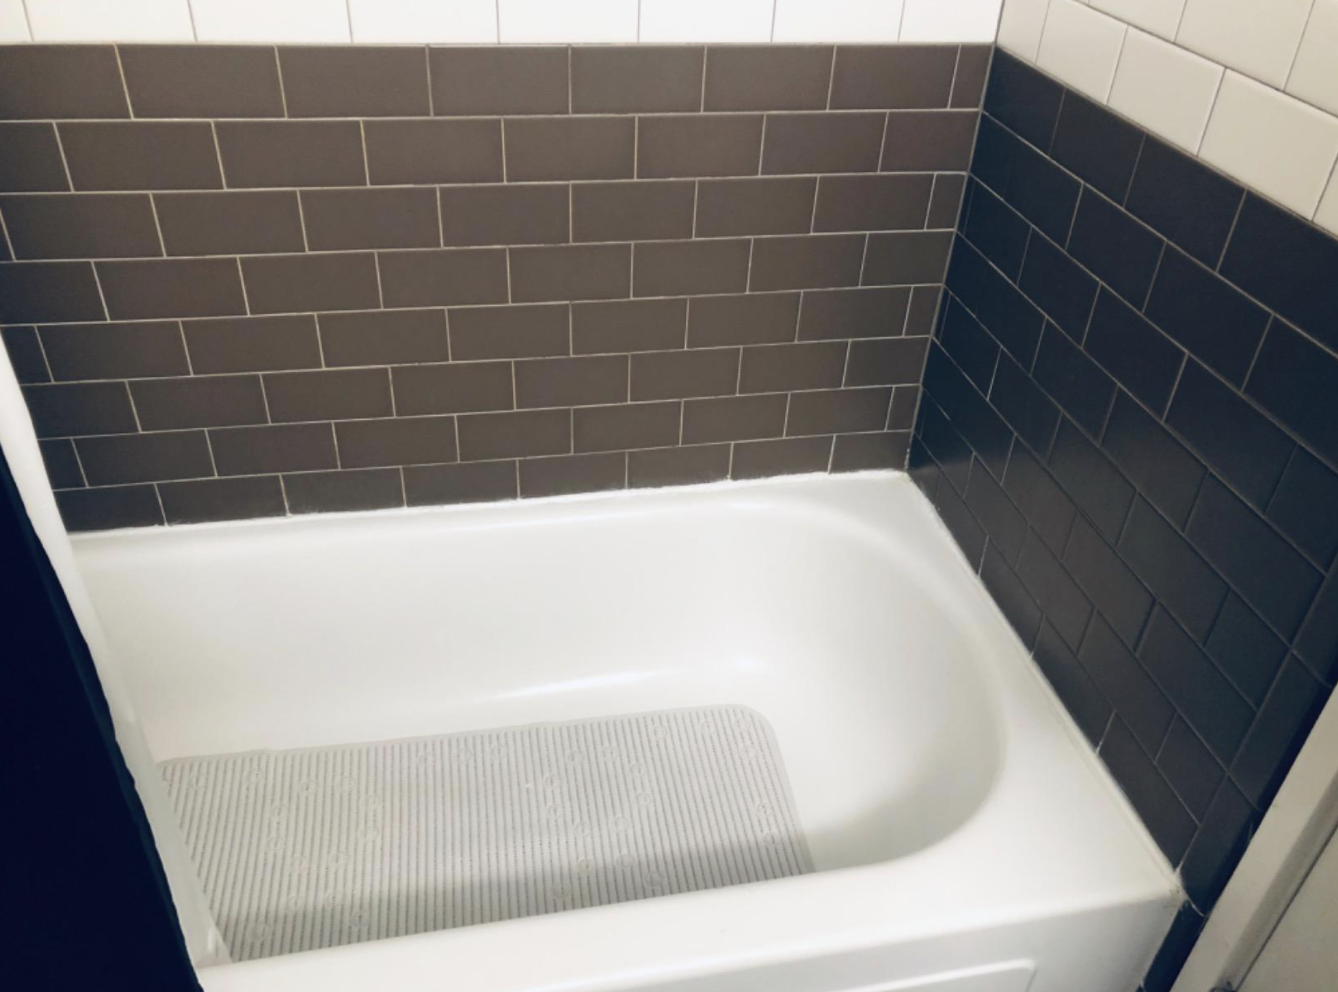 A reviewer&#x27;s tub caulked with the product